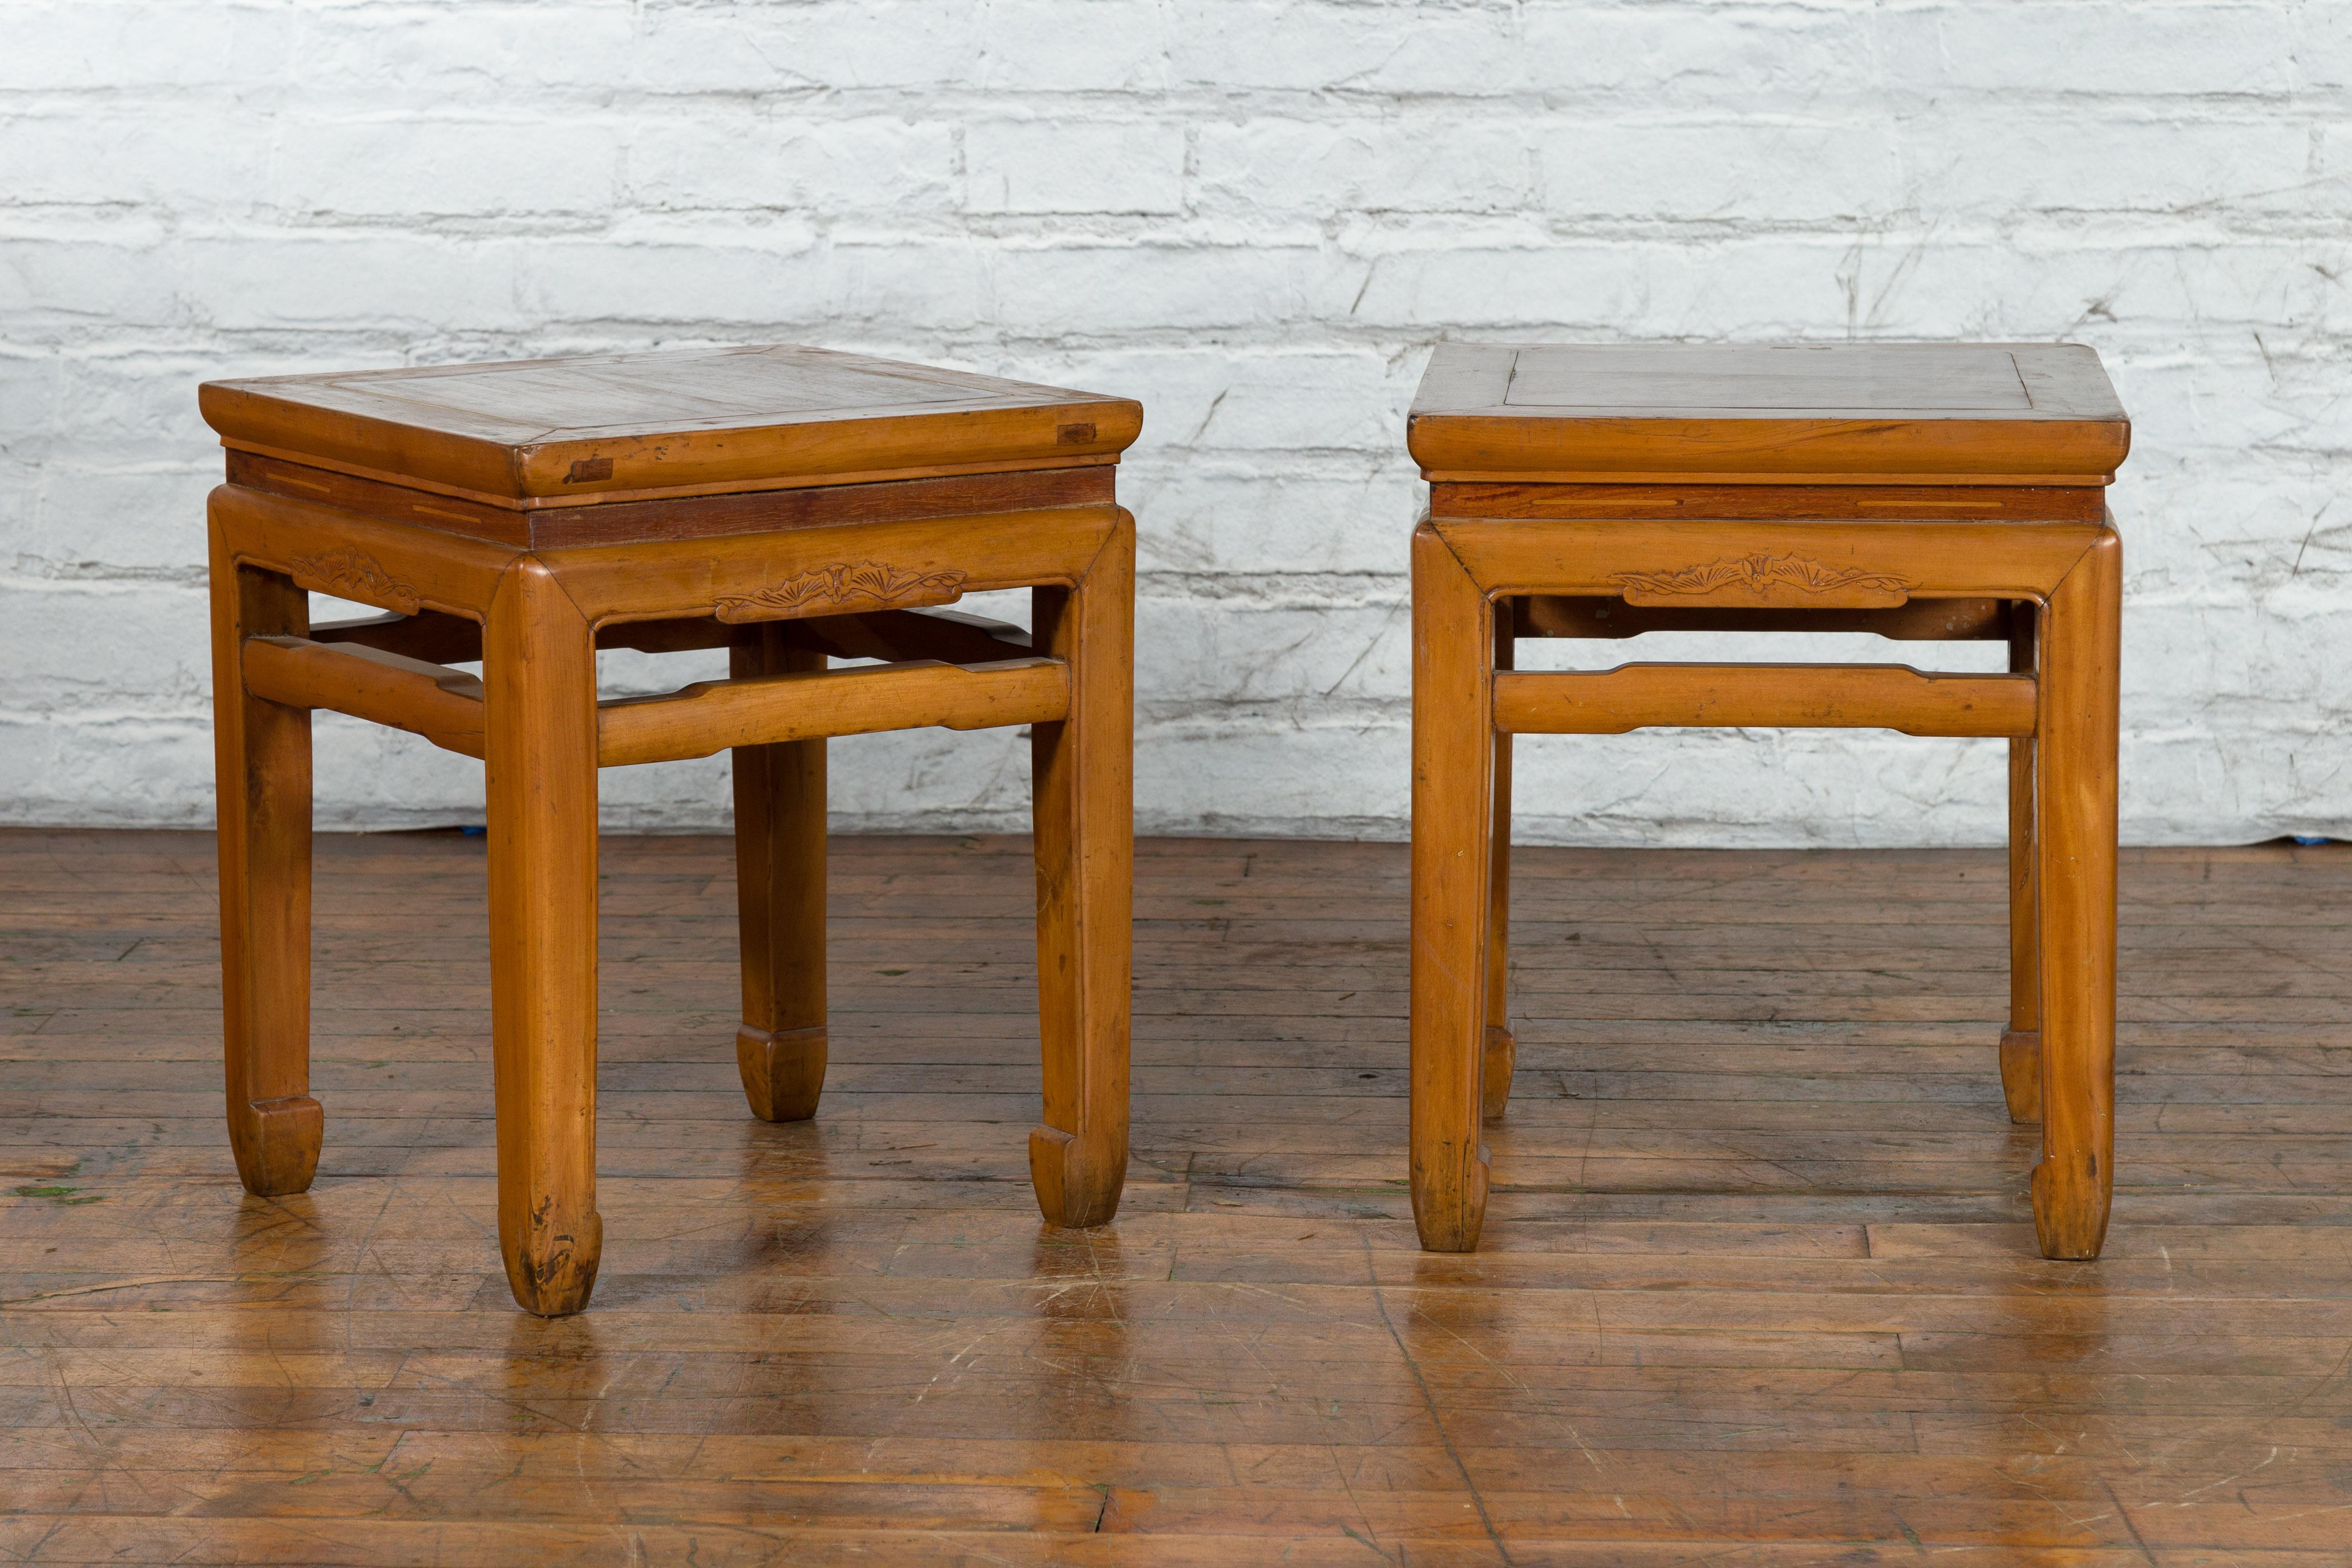 A pair of antique Chinese Ming Dynasty style wooden side tables from the early 20th century, with carved aprons, humpback stretchers and horse hoof legs. Created in China during the Midcentury period, each of this pair of wooden side tables features